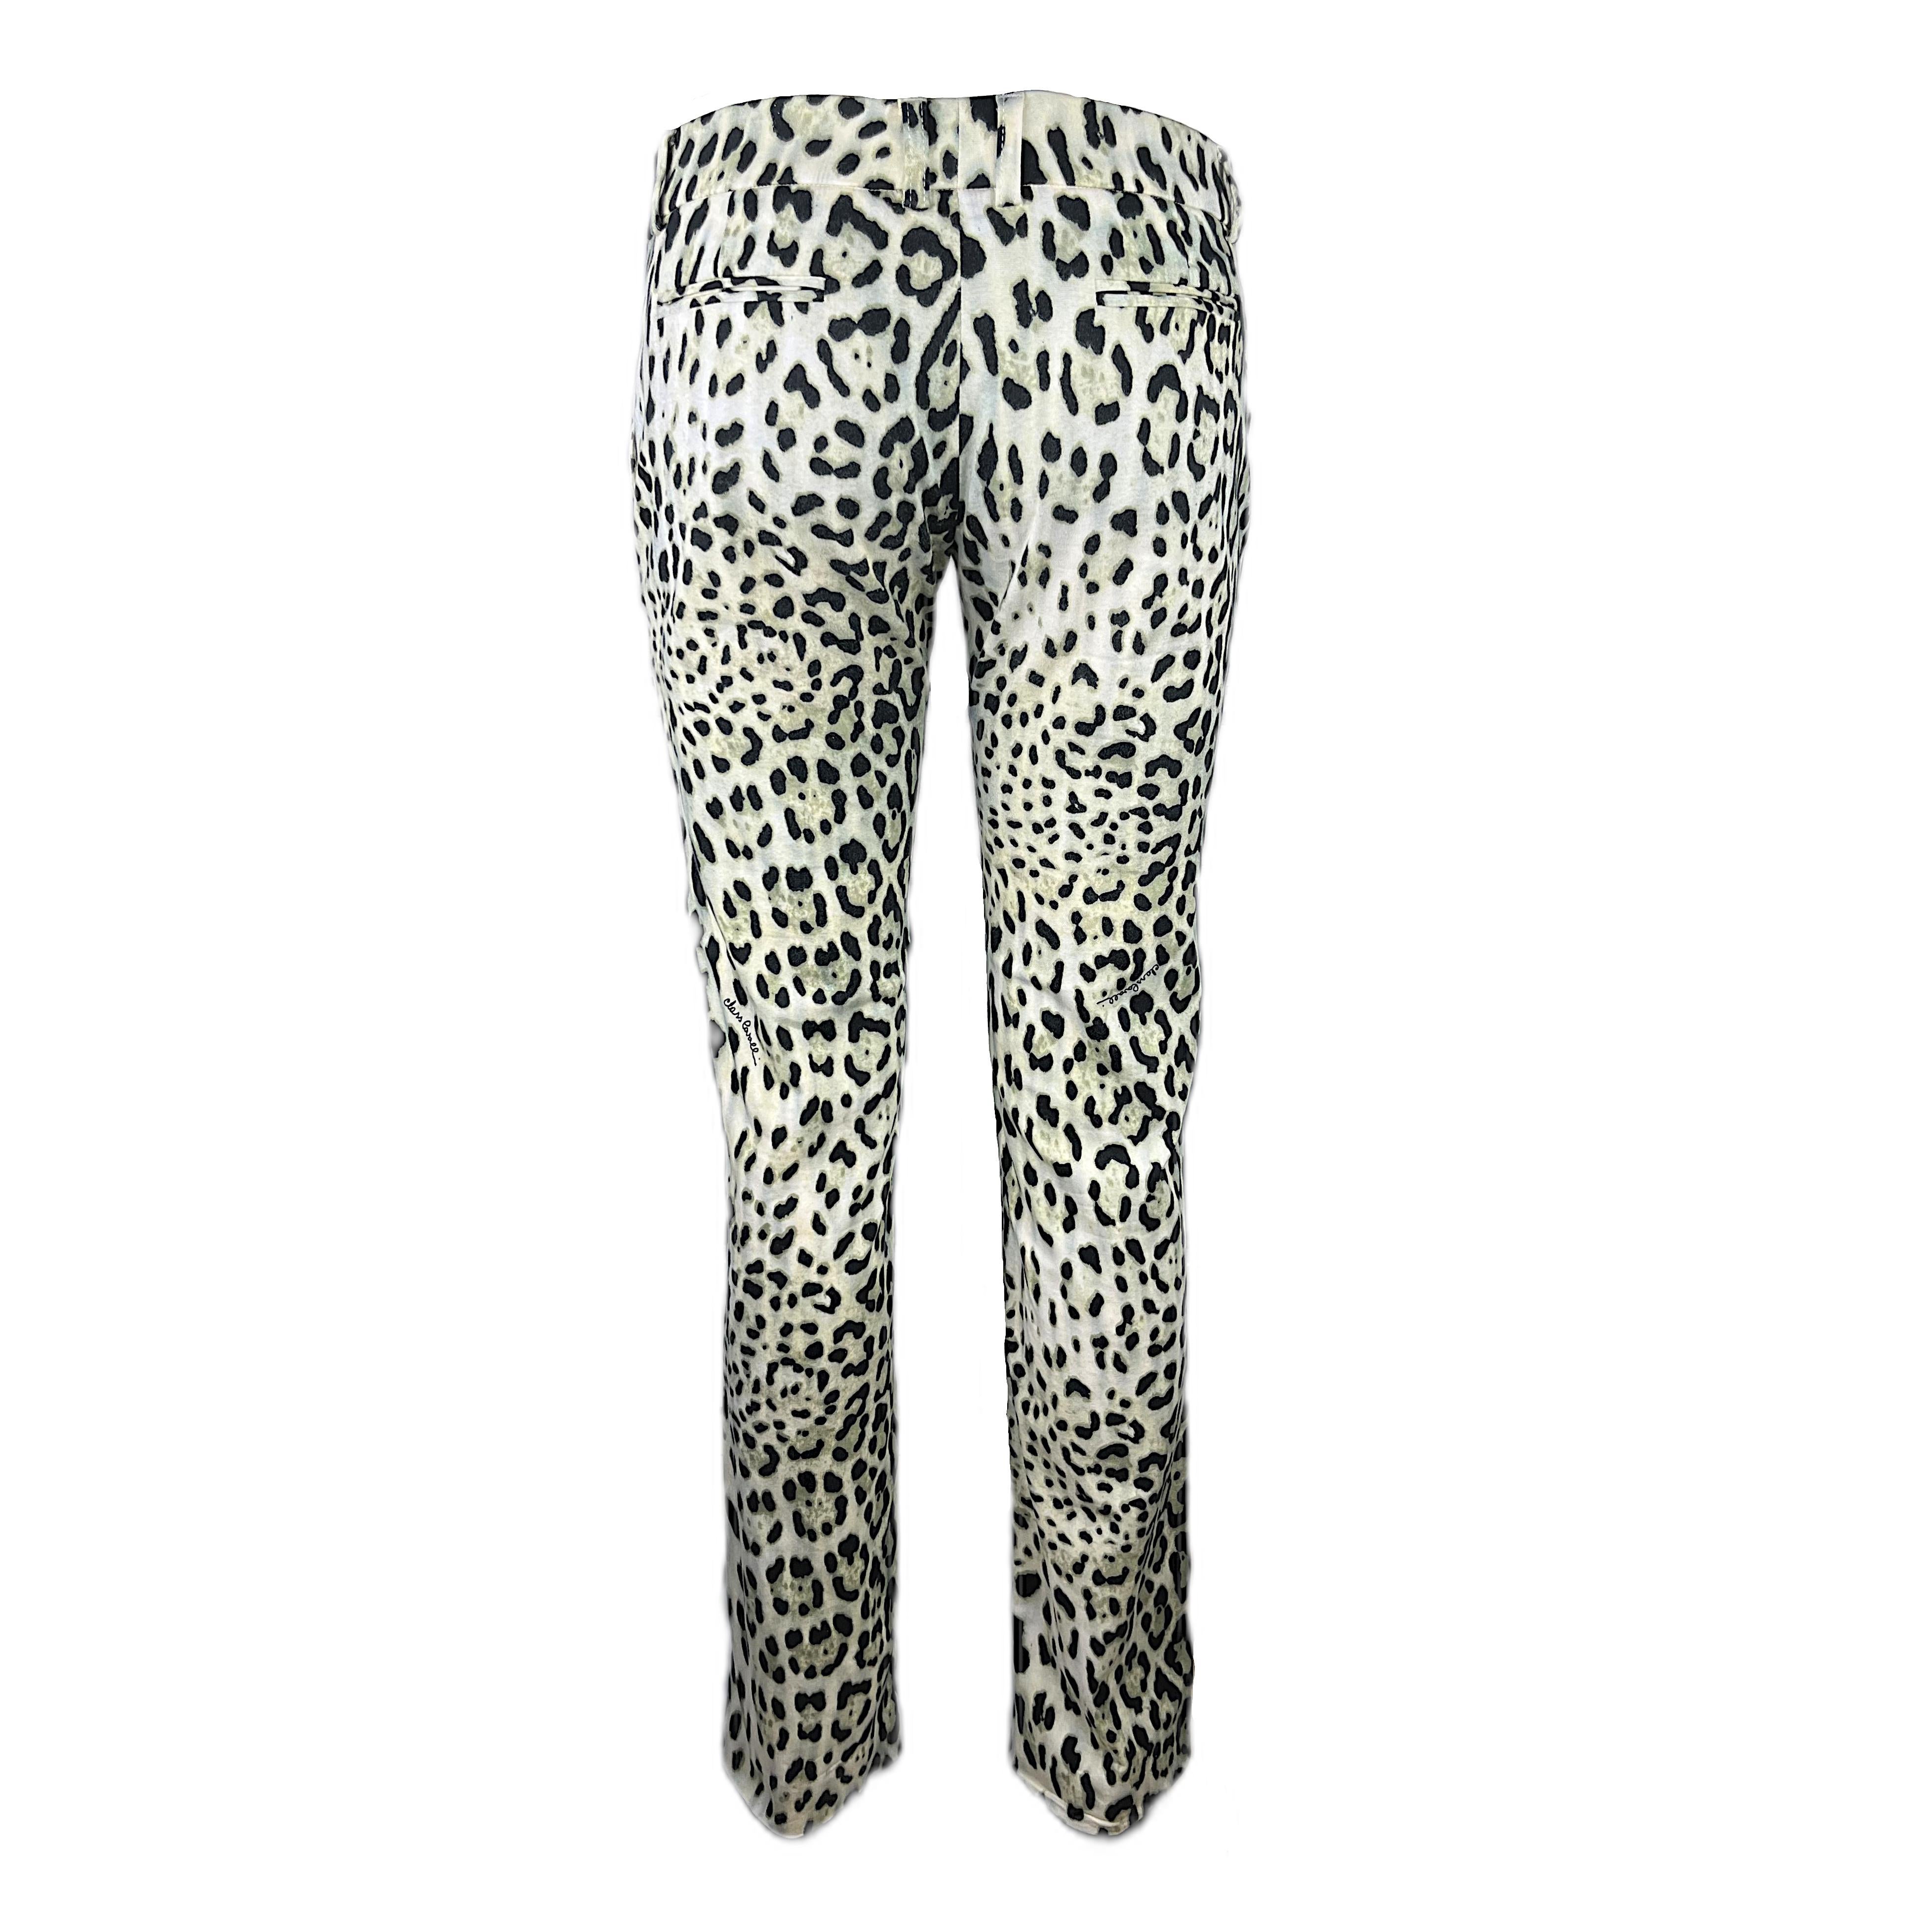 Gray CLASS CAVALLI – 2011 Pants with Signed White Leopard Print  Size 8US 38EU